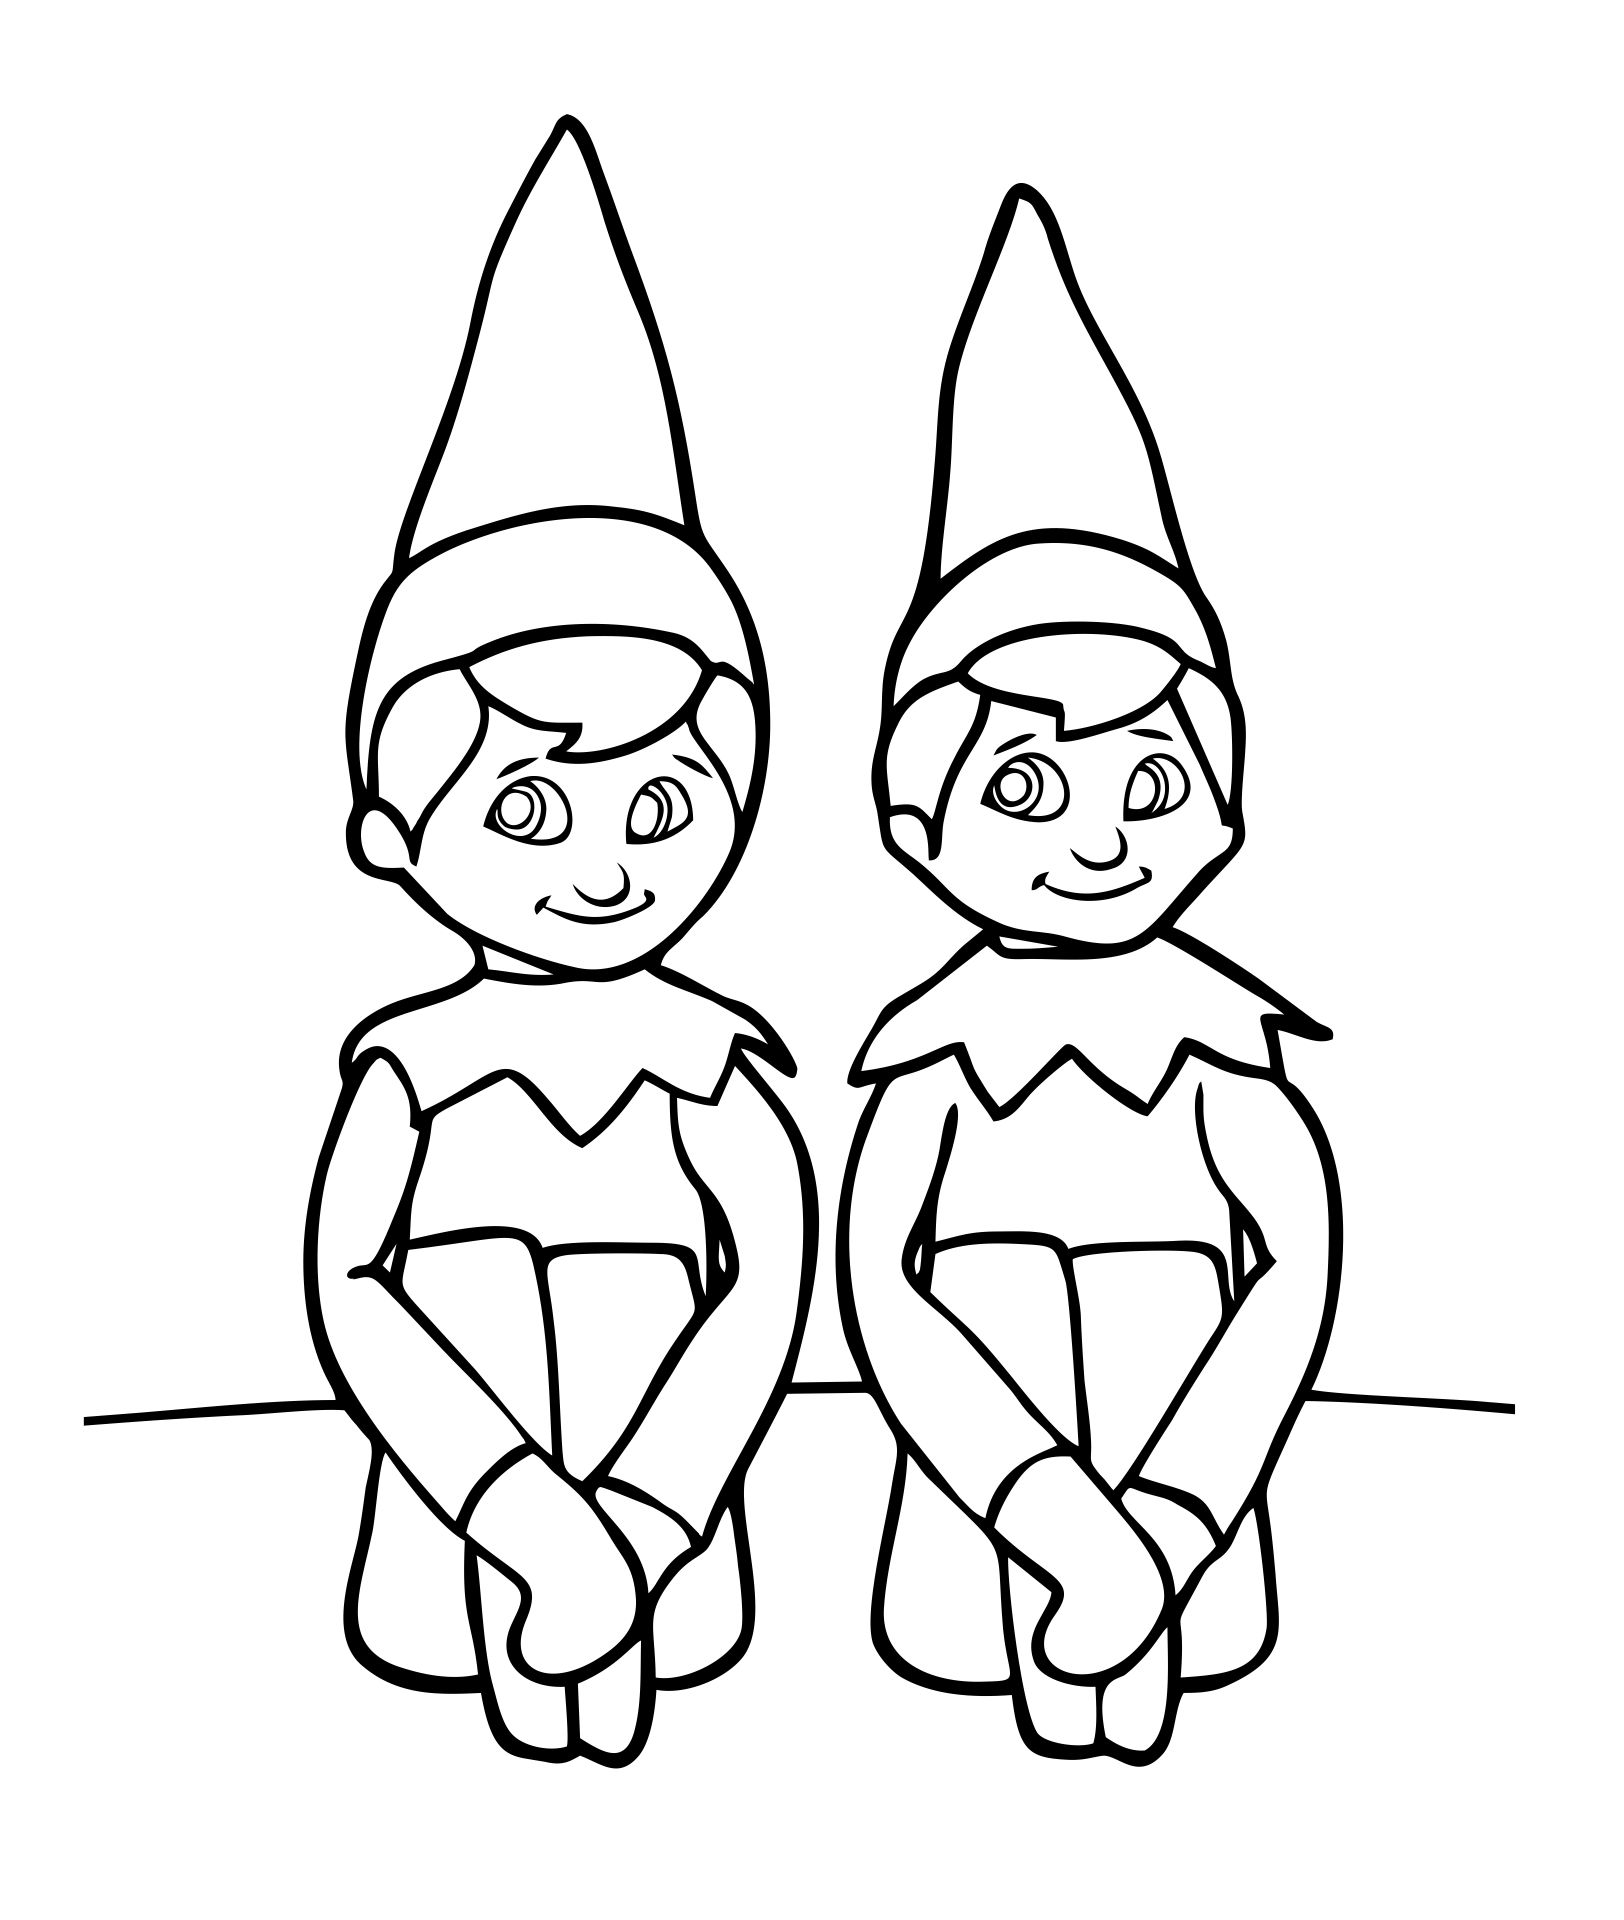 Elf On The Shelf Coloring Pages To Print